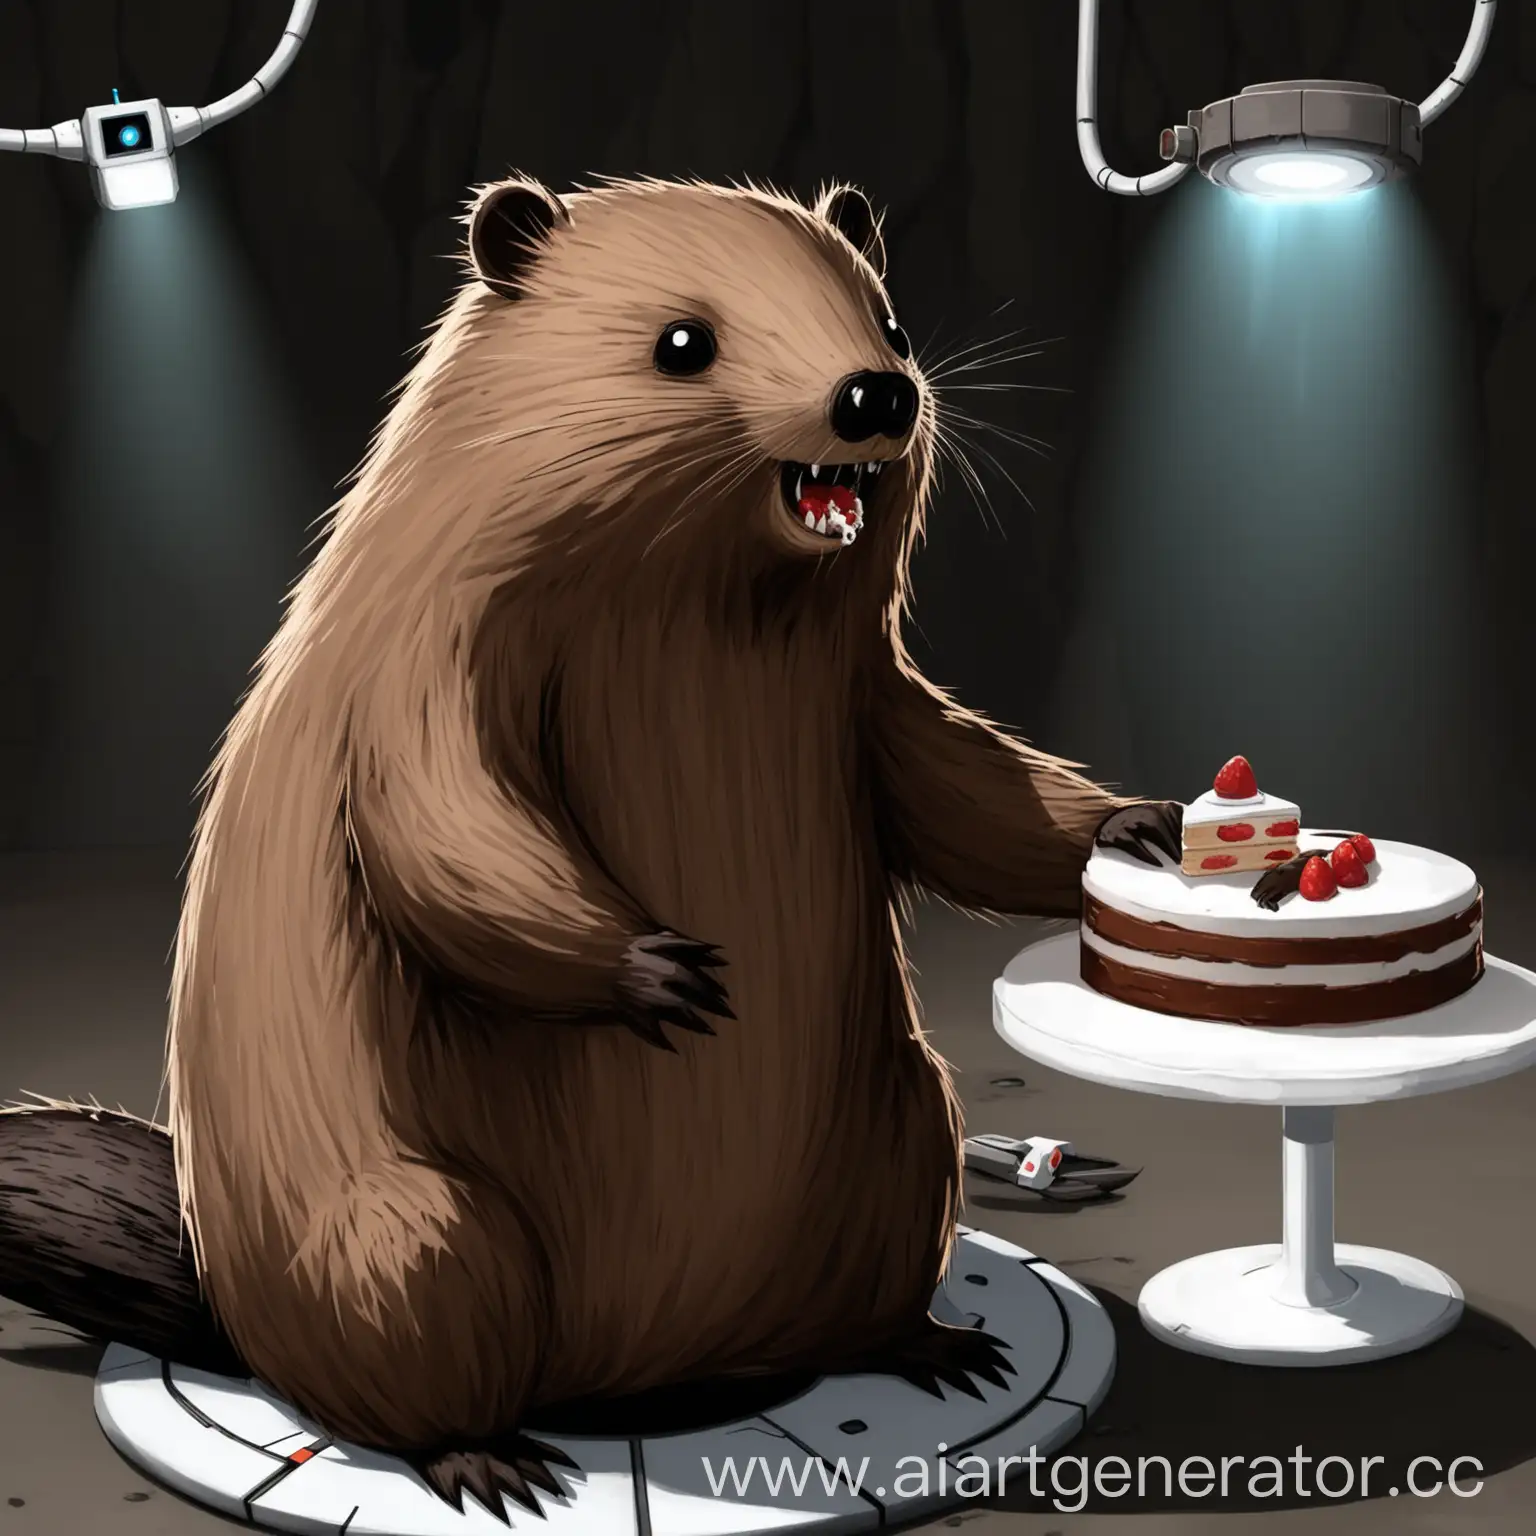 Beaver-Holding-Cake-from-Portal-2-Video-Game